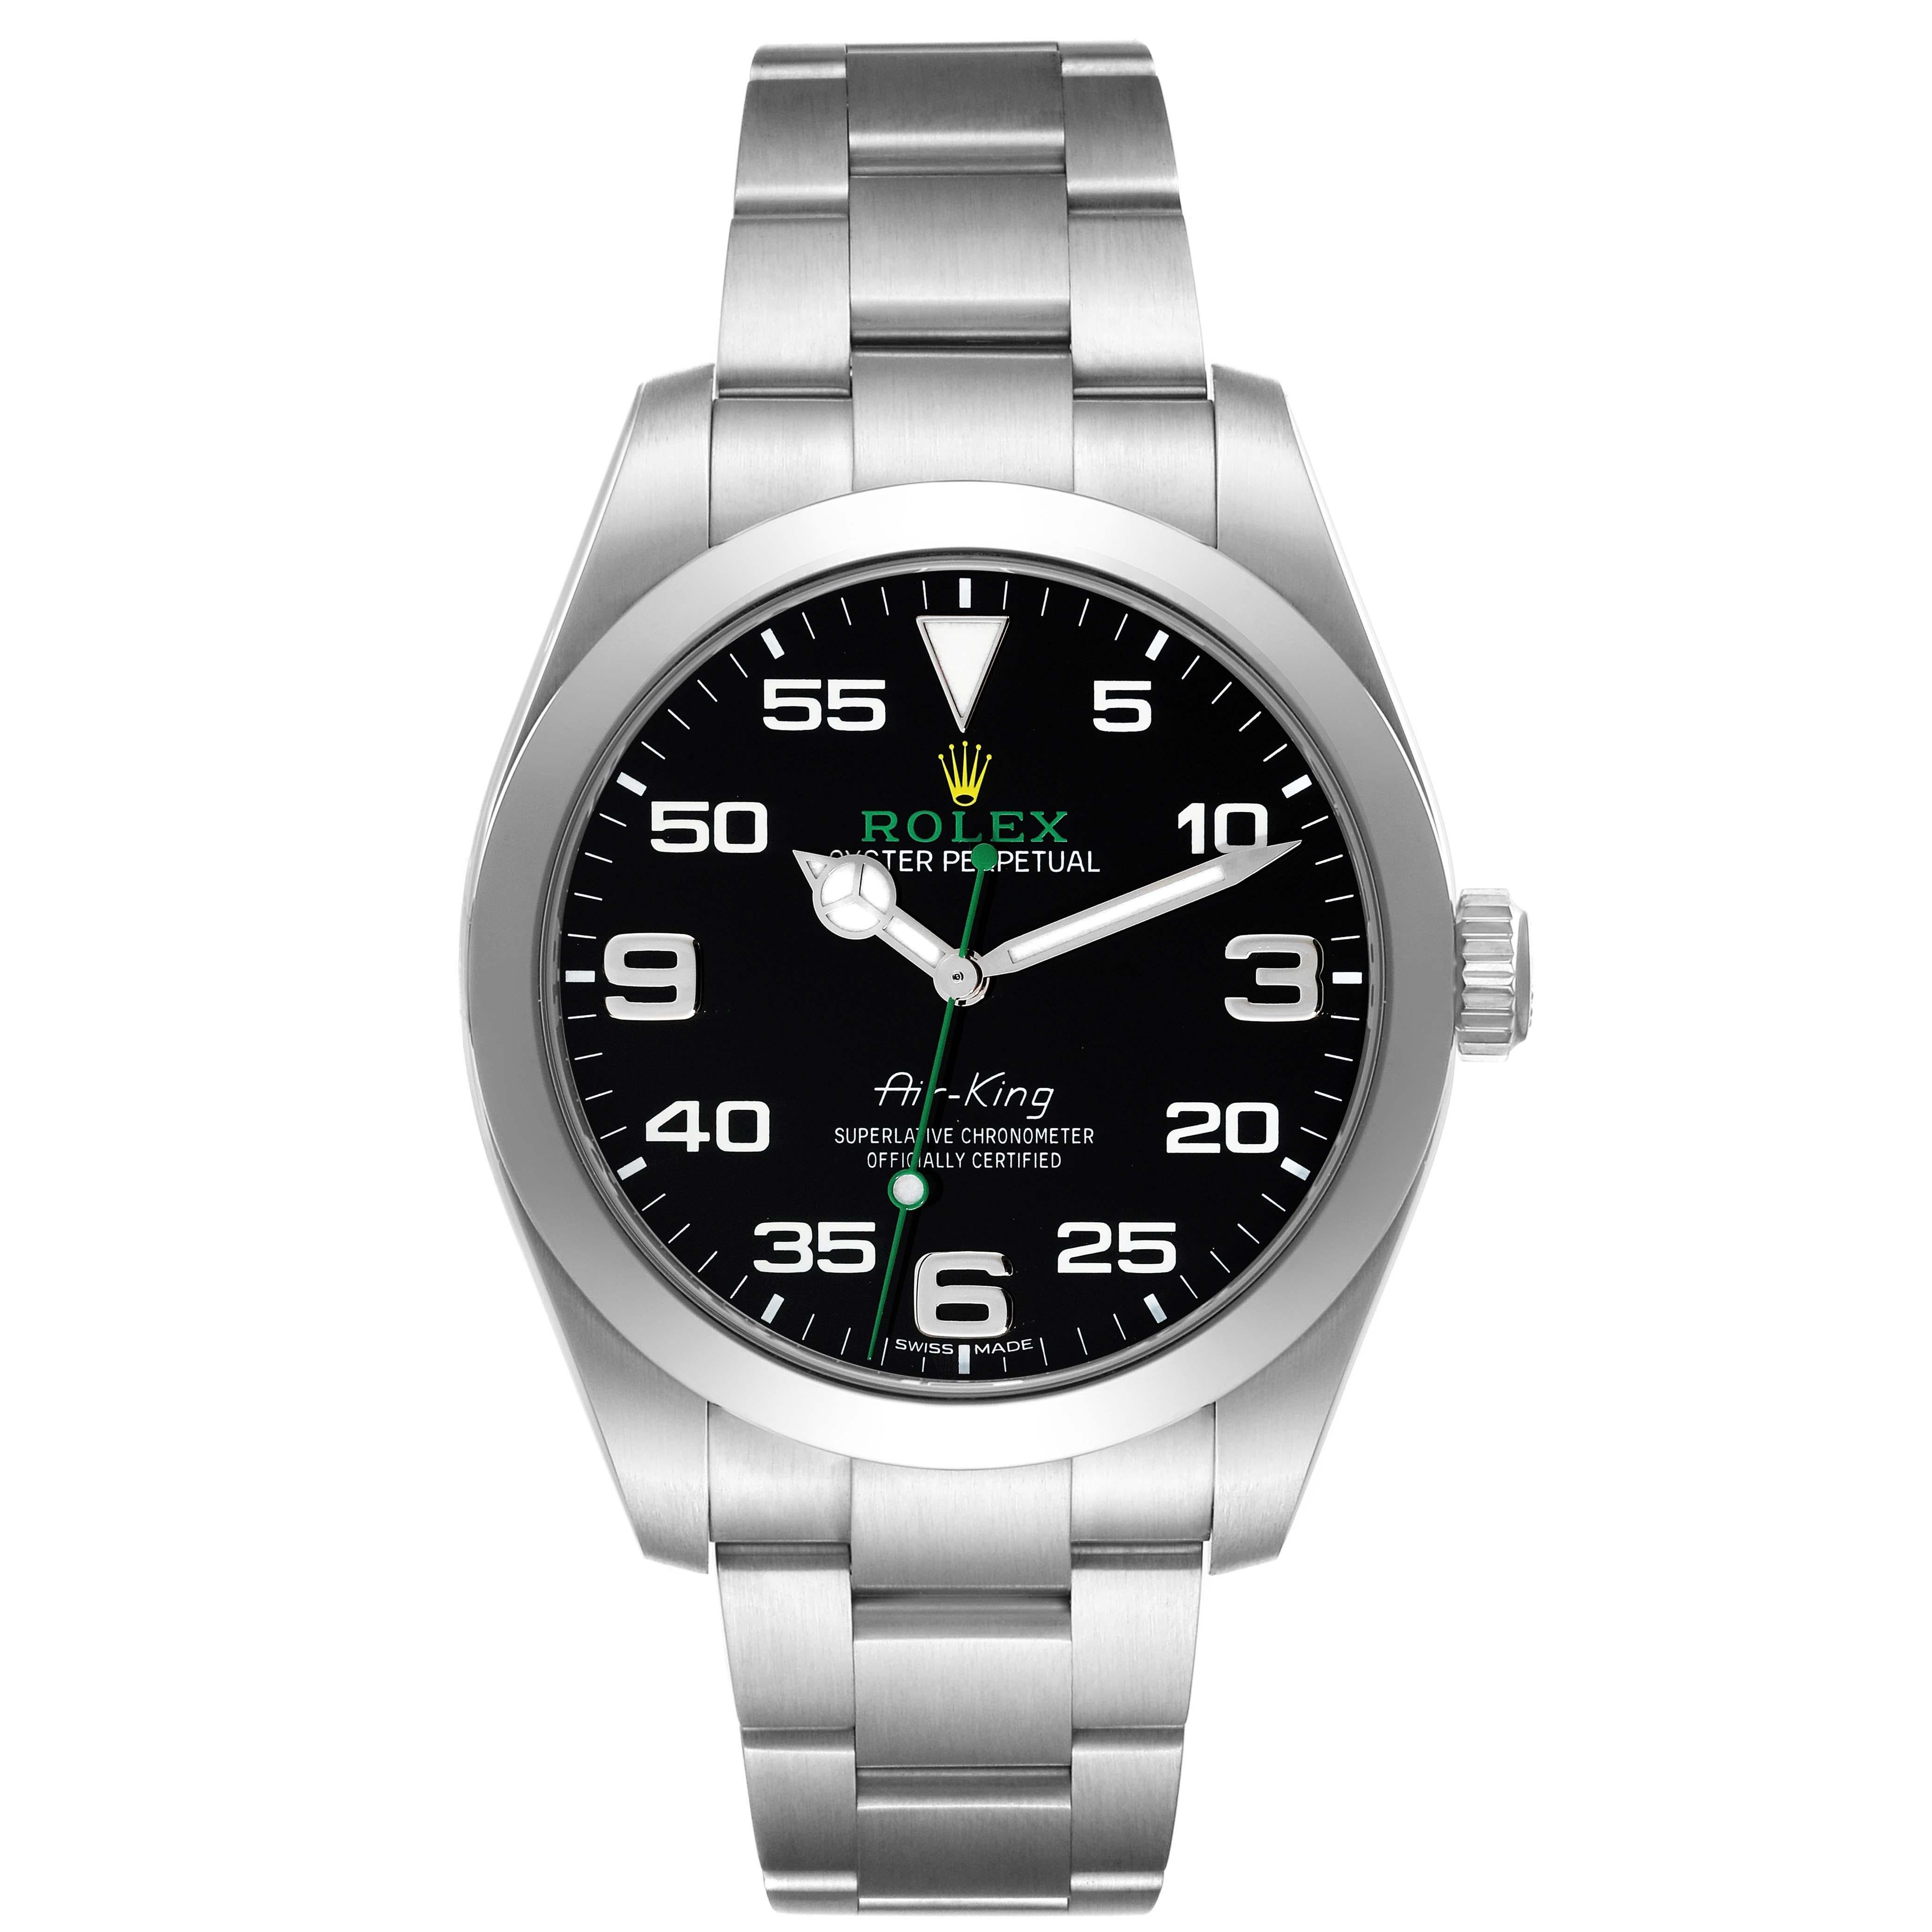 Rolex Oyster Perpetual Air King Green Hand Steel Mens Watch 116900 Box Card. Officially certified chronometer automatic self-winding movement. Stainless steel case 40.0 mm in diameter. Rolex logo on a crown. Stainless steel smooth domed bezel.